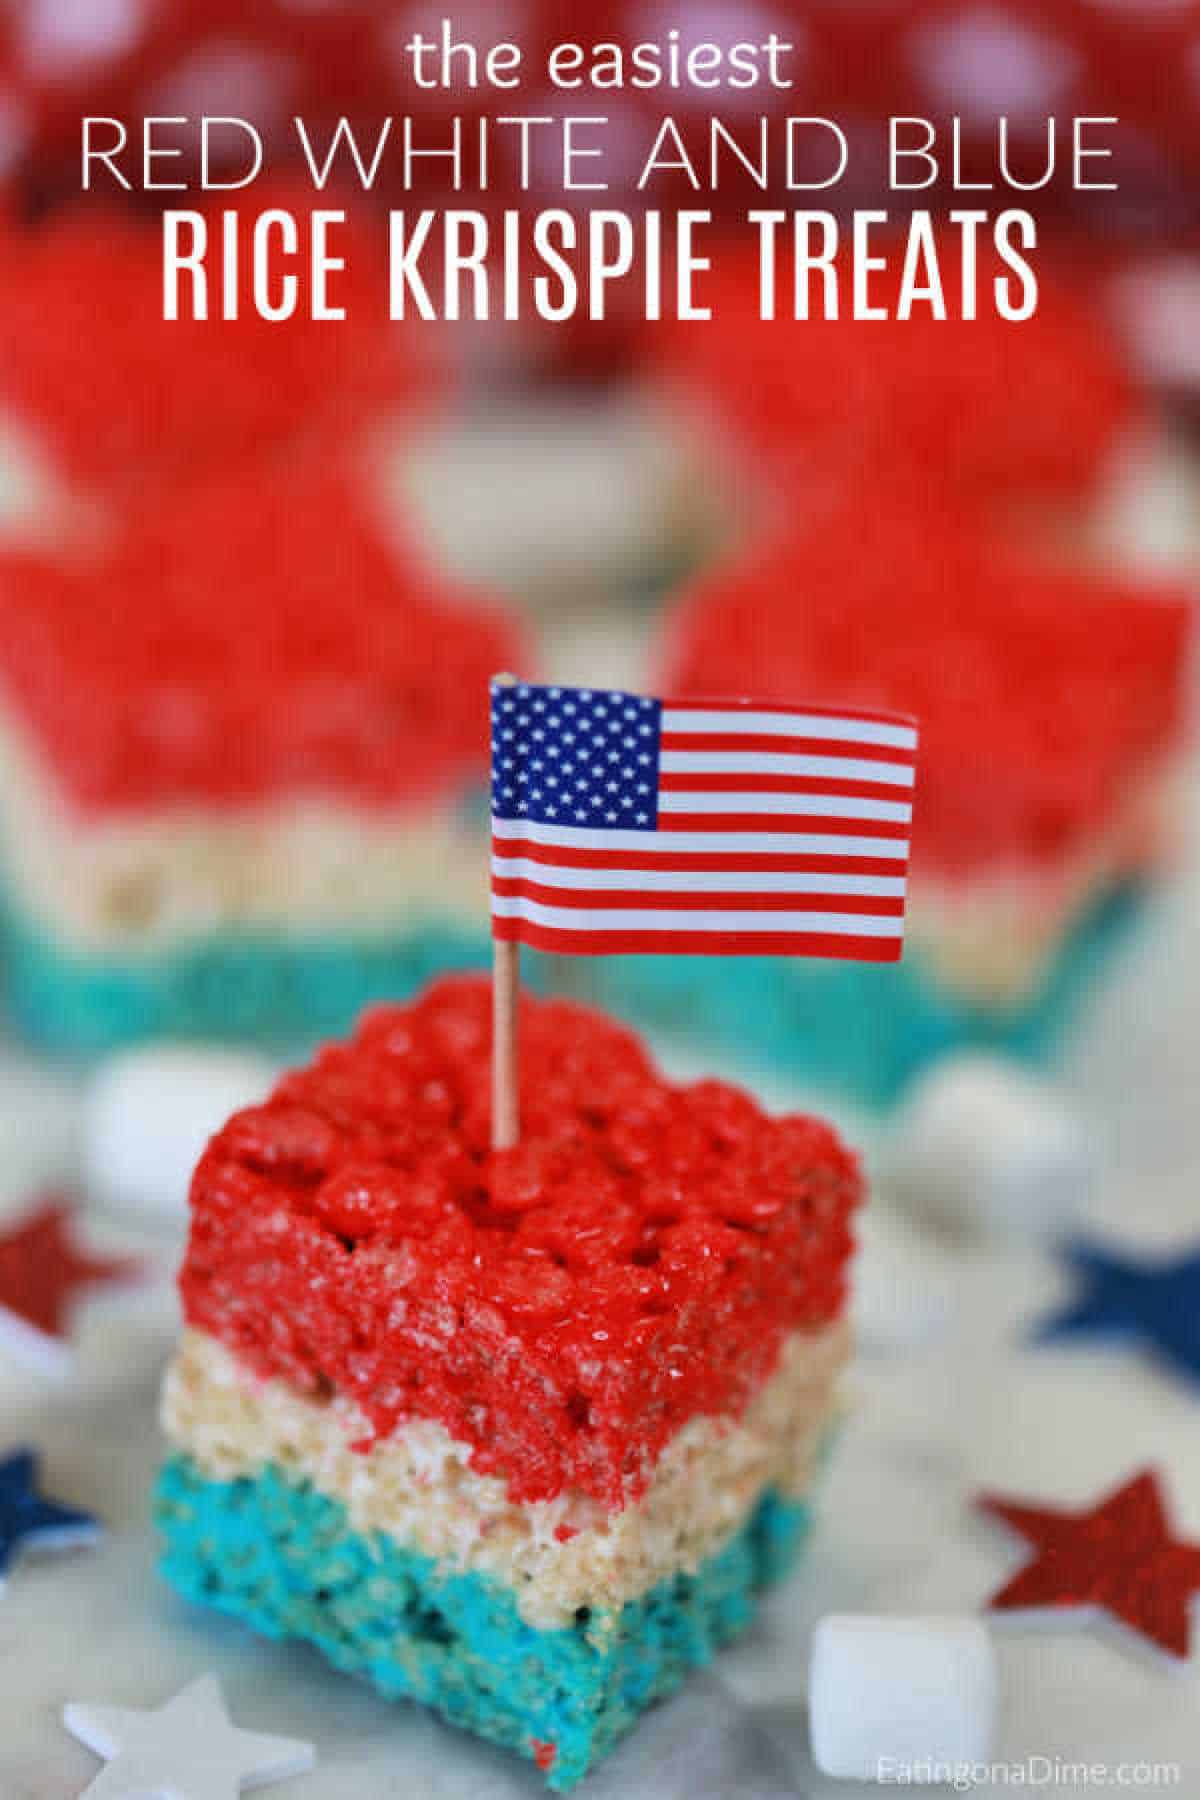 Red White and Blue Rice Krispie Treats cut into square with an American Flag party favor stuck into the treat